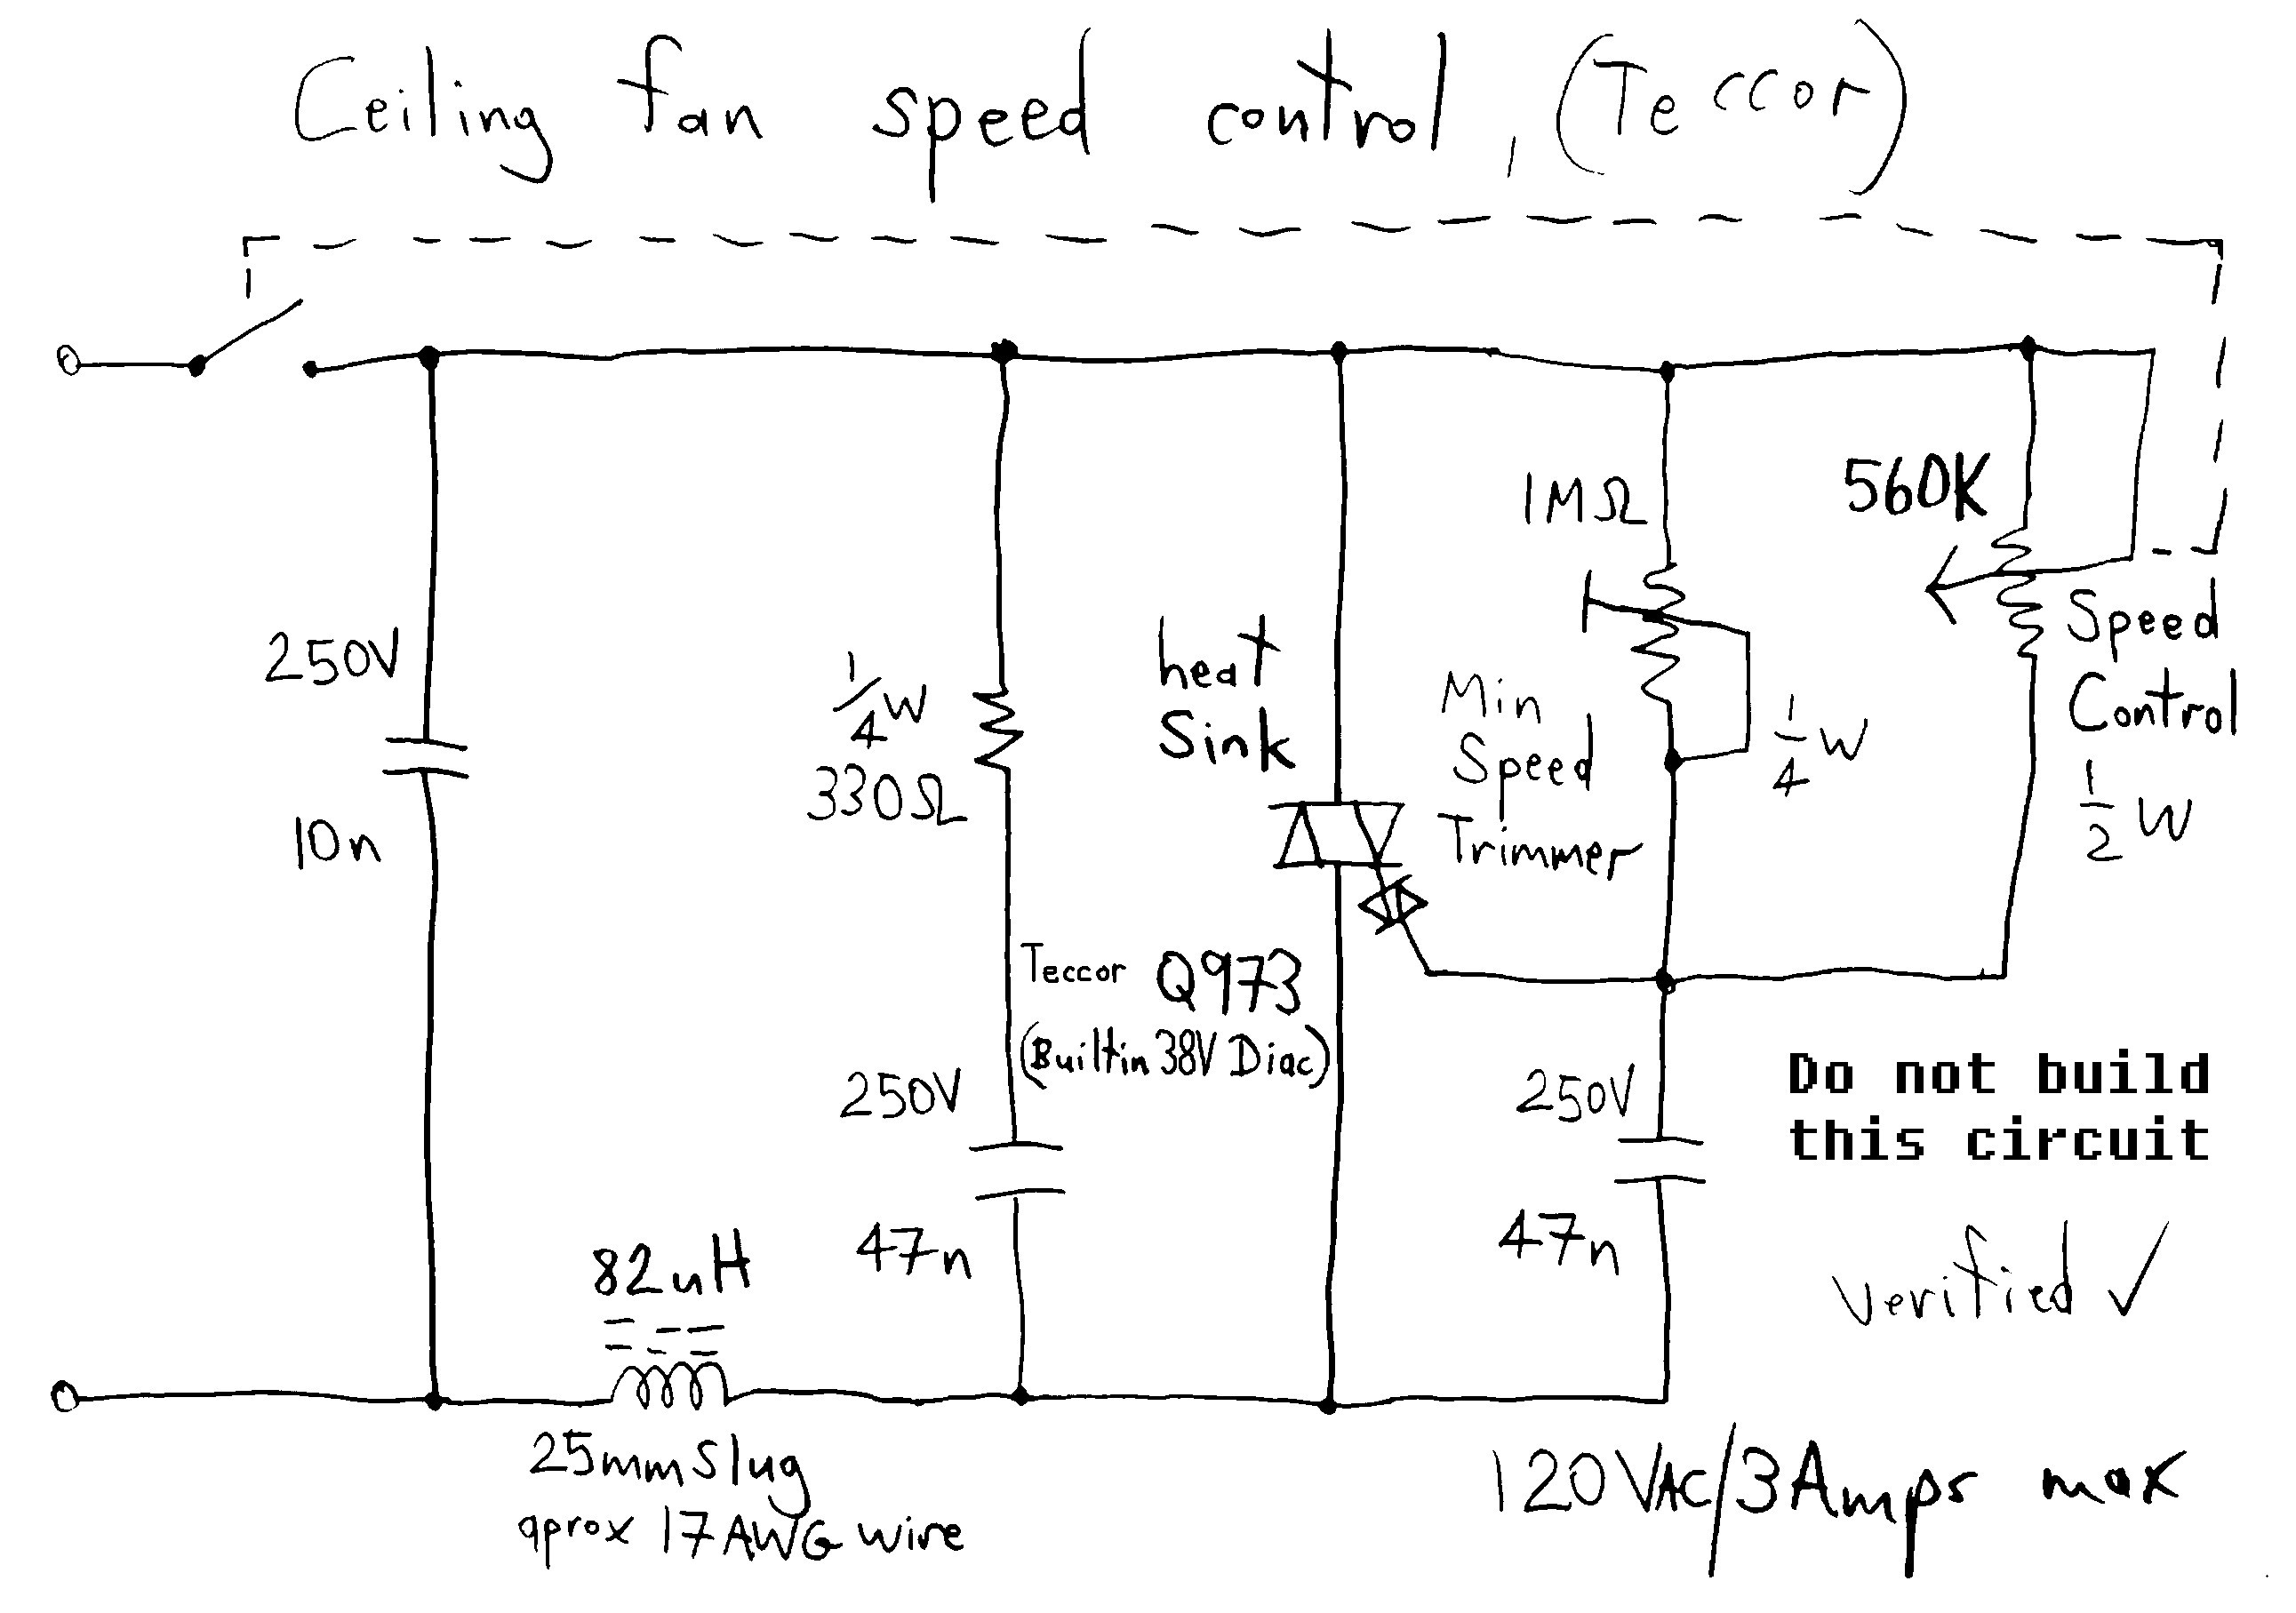 Hampton Bay Ceiling Fan Capacitor Wiring Diagram from mainetreasurechest.com